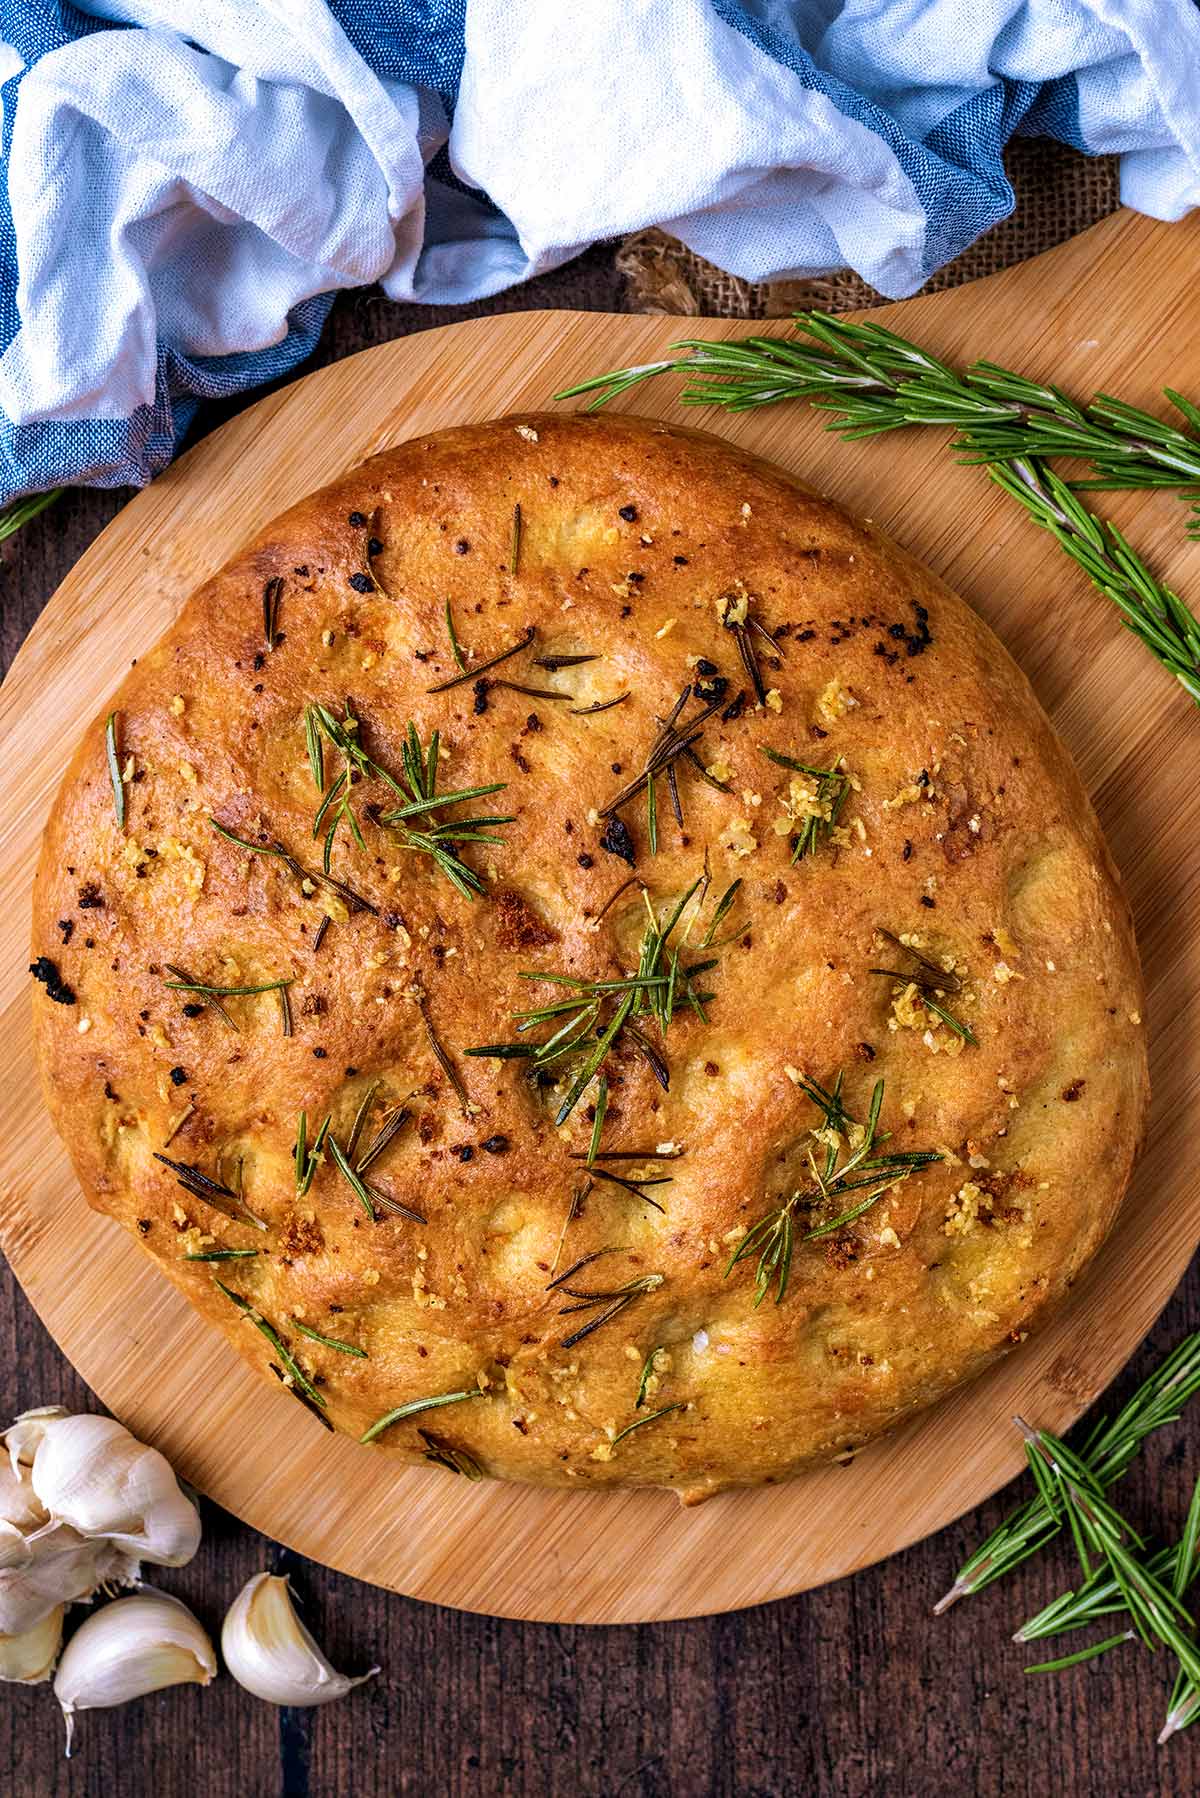 A round focaccia bread on a wooden serving board.